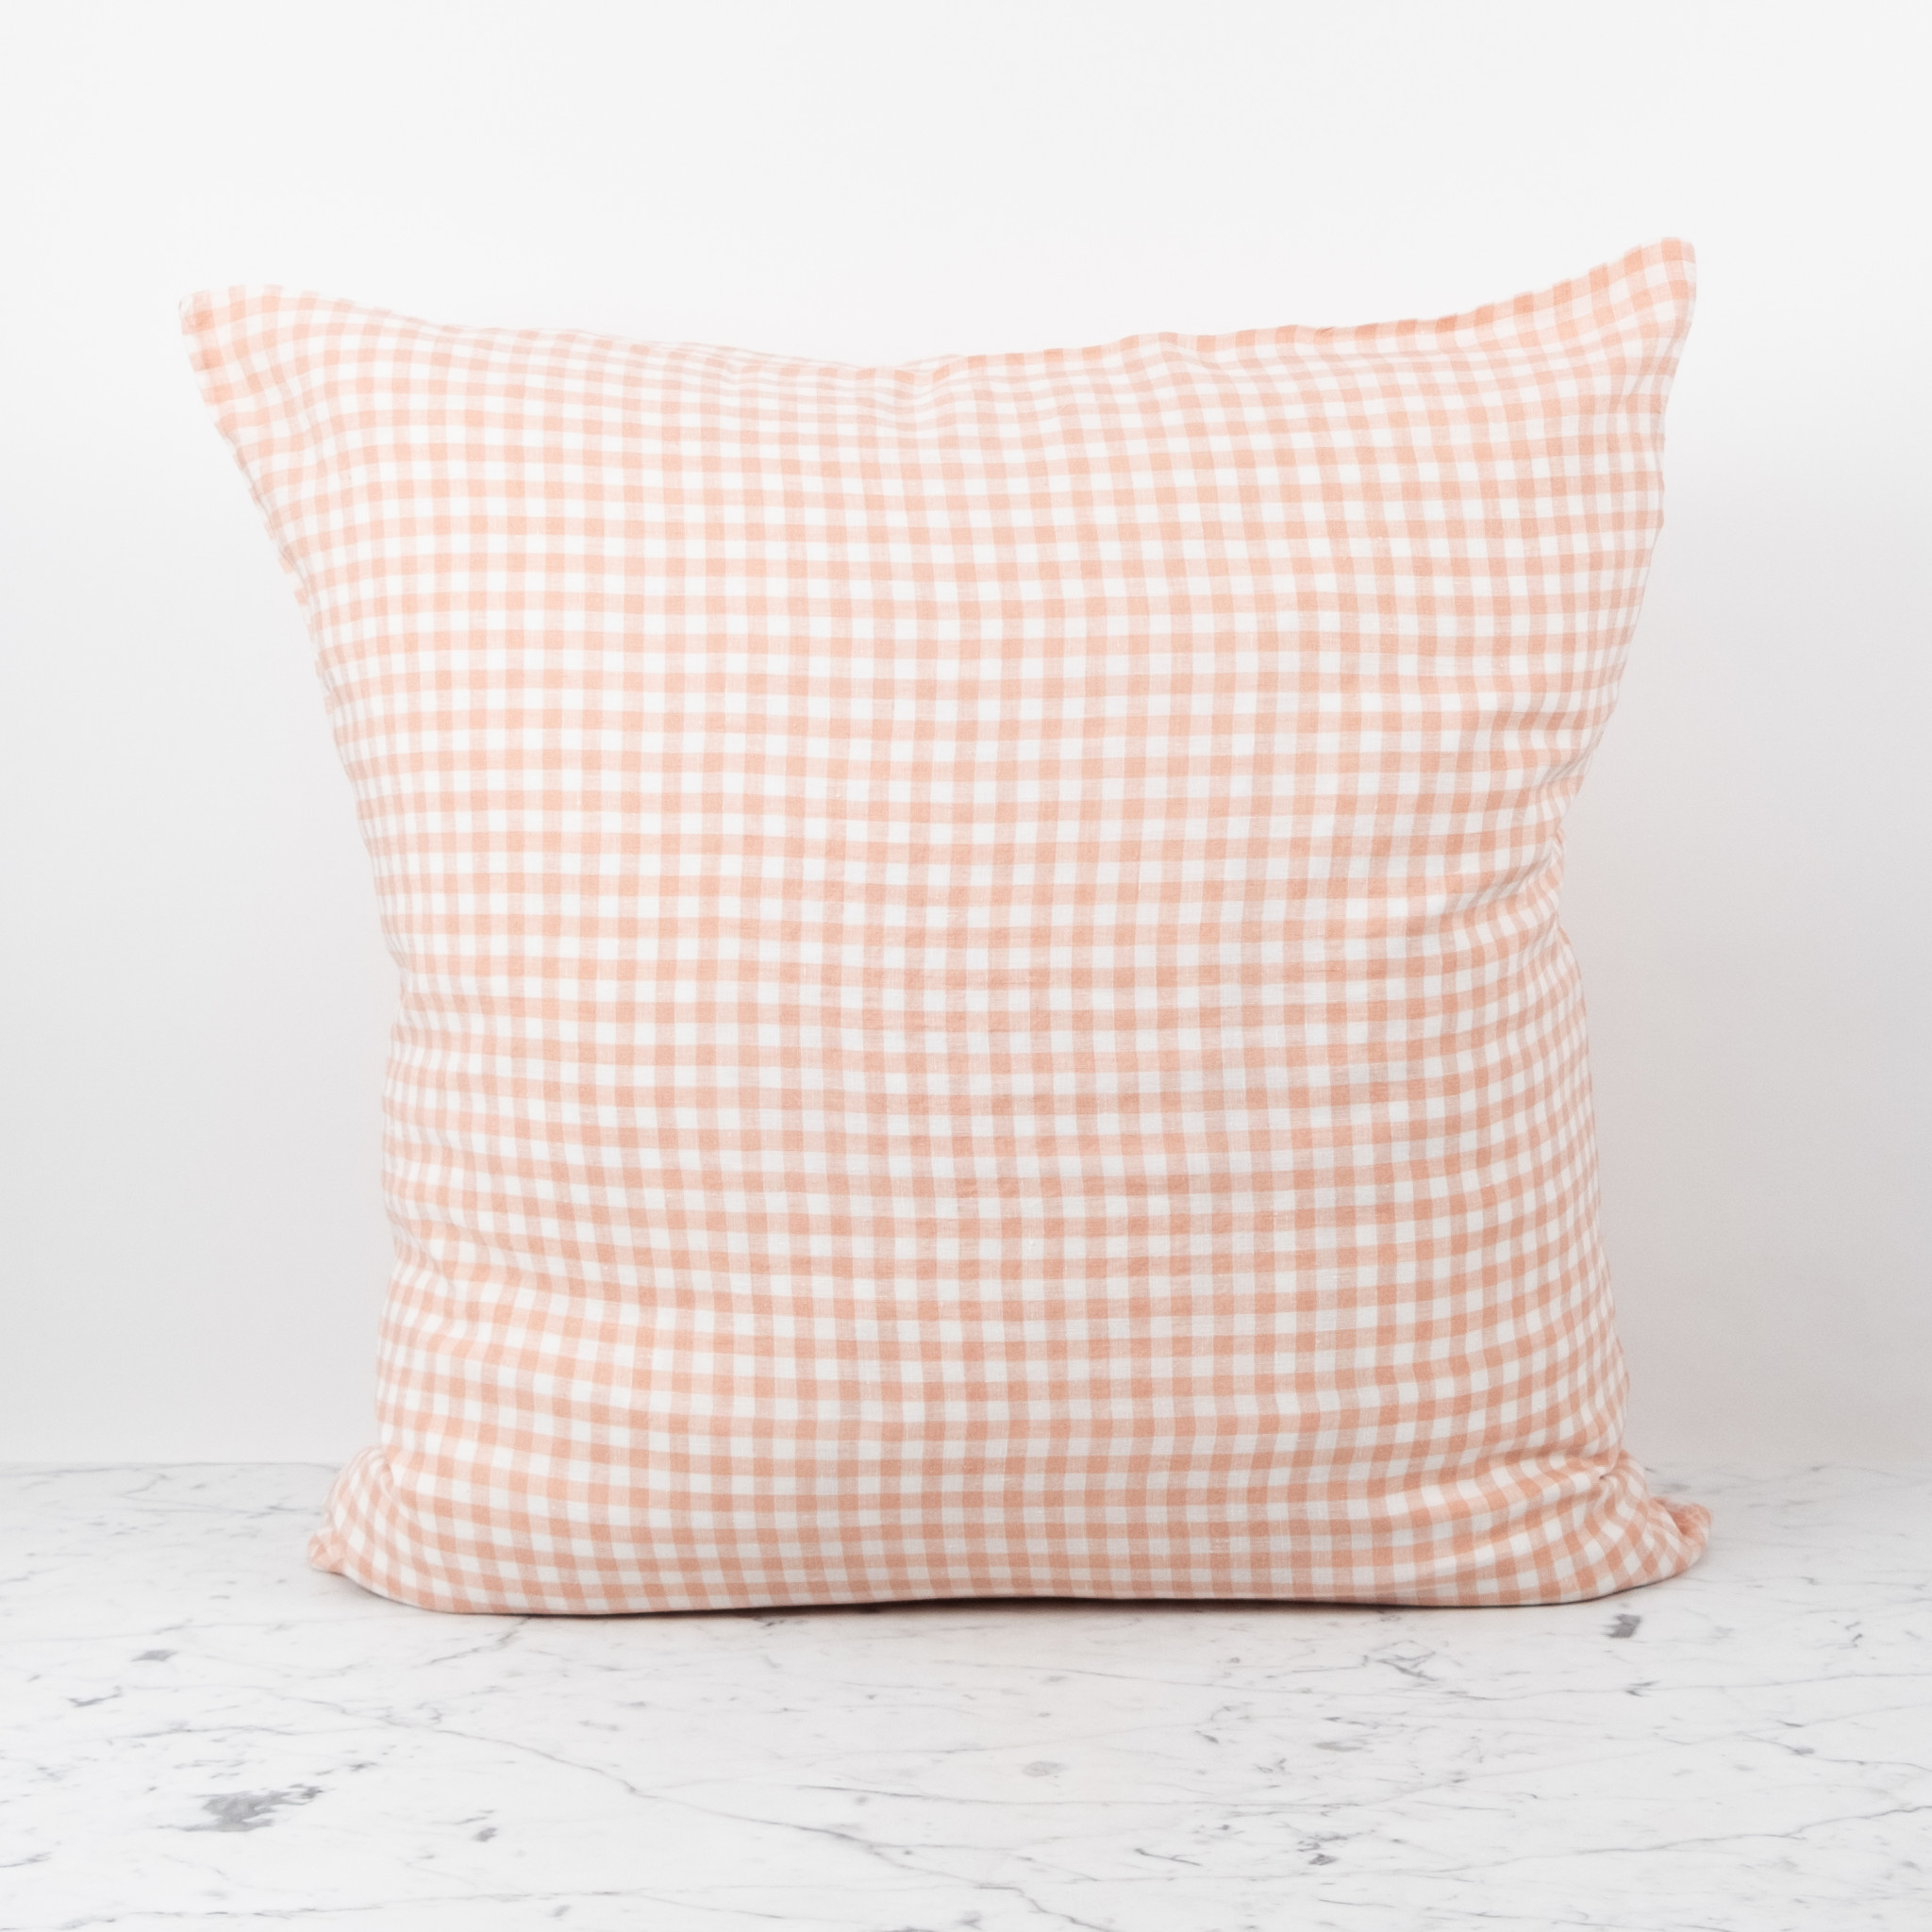 Linge Particulier French Linen Pillow Cover - 20" - Light Copper Gingham